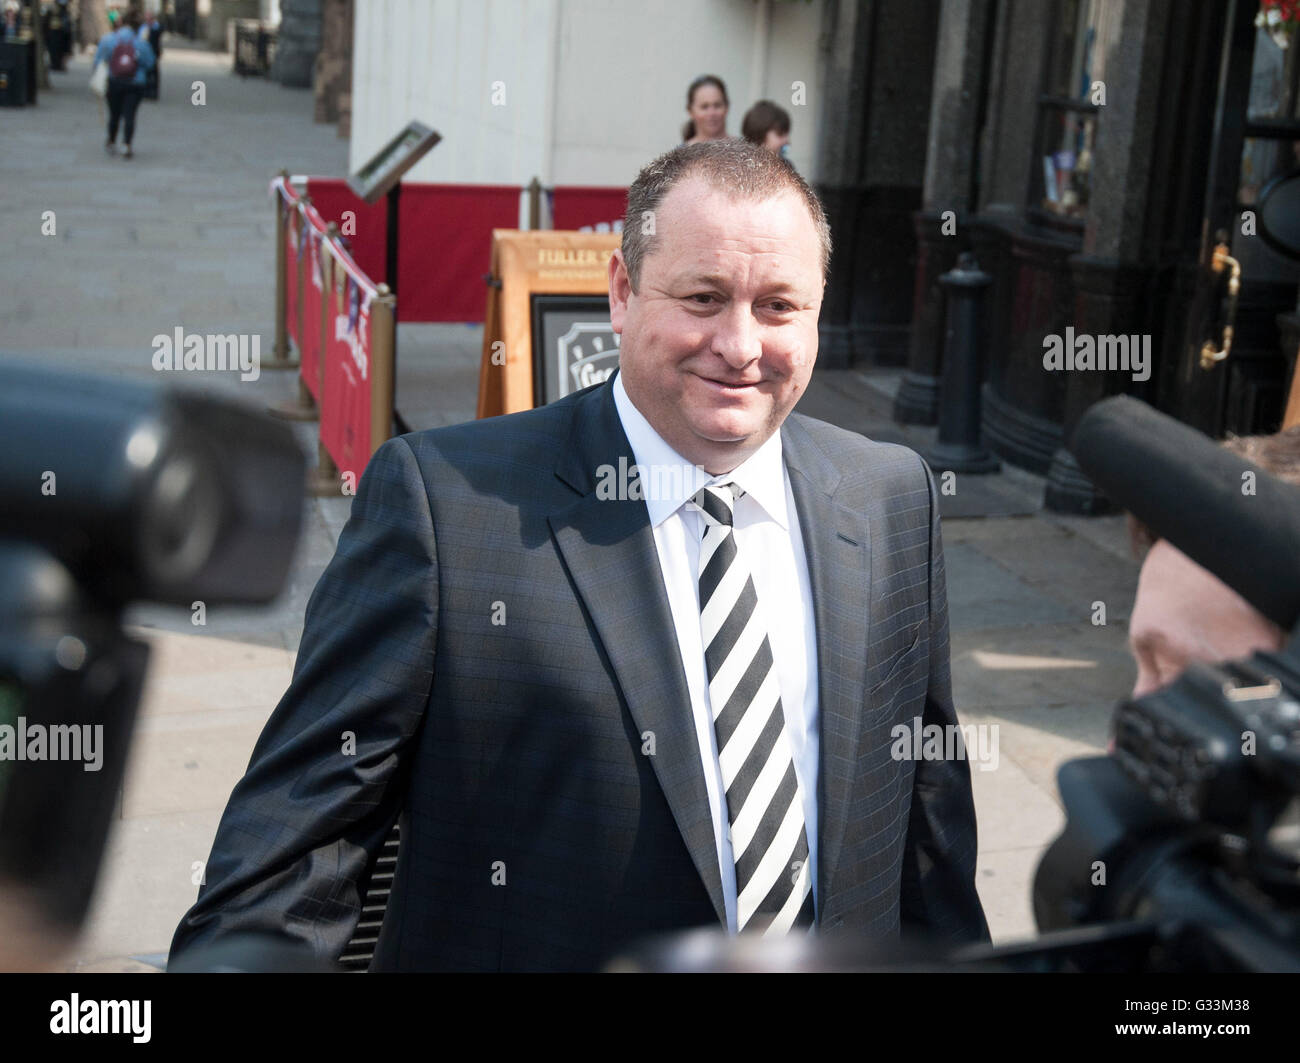 Sports Direct boss Mike Ashley arrives at Portcullis House, London, where he will give evidence to the Business, Innovation and Skills Committee on working conditions at his company. Stock Photo